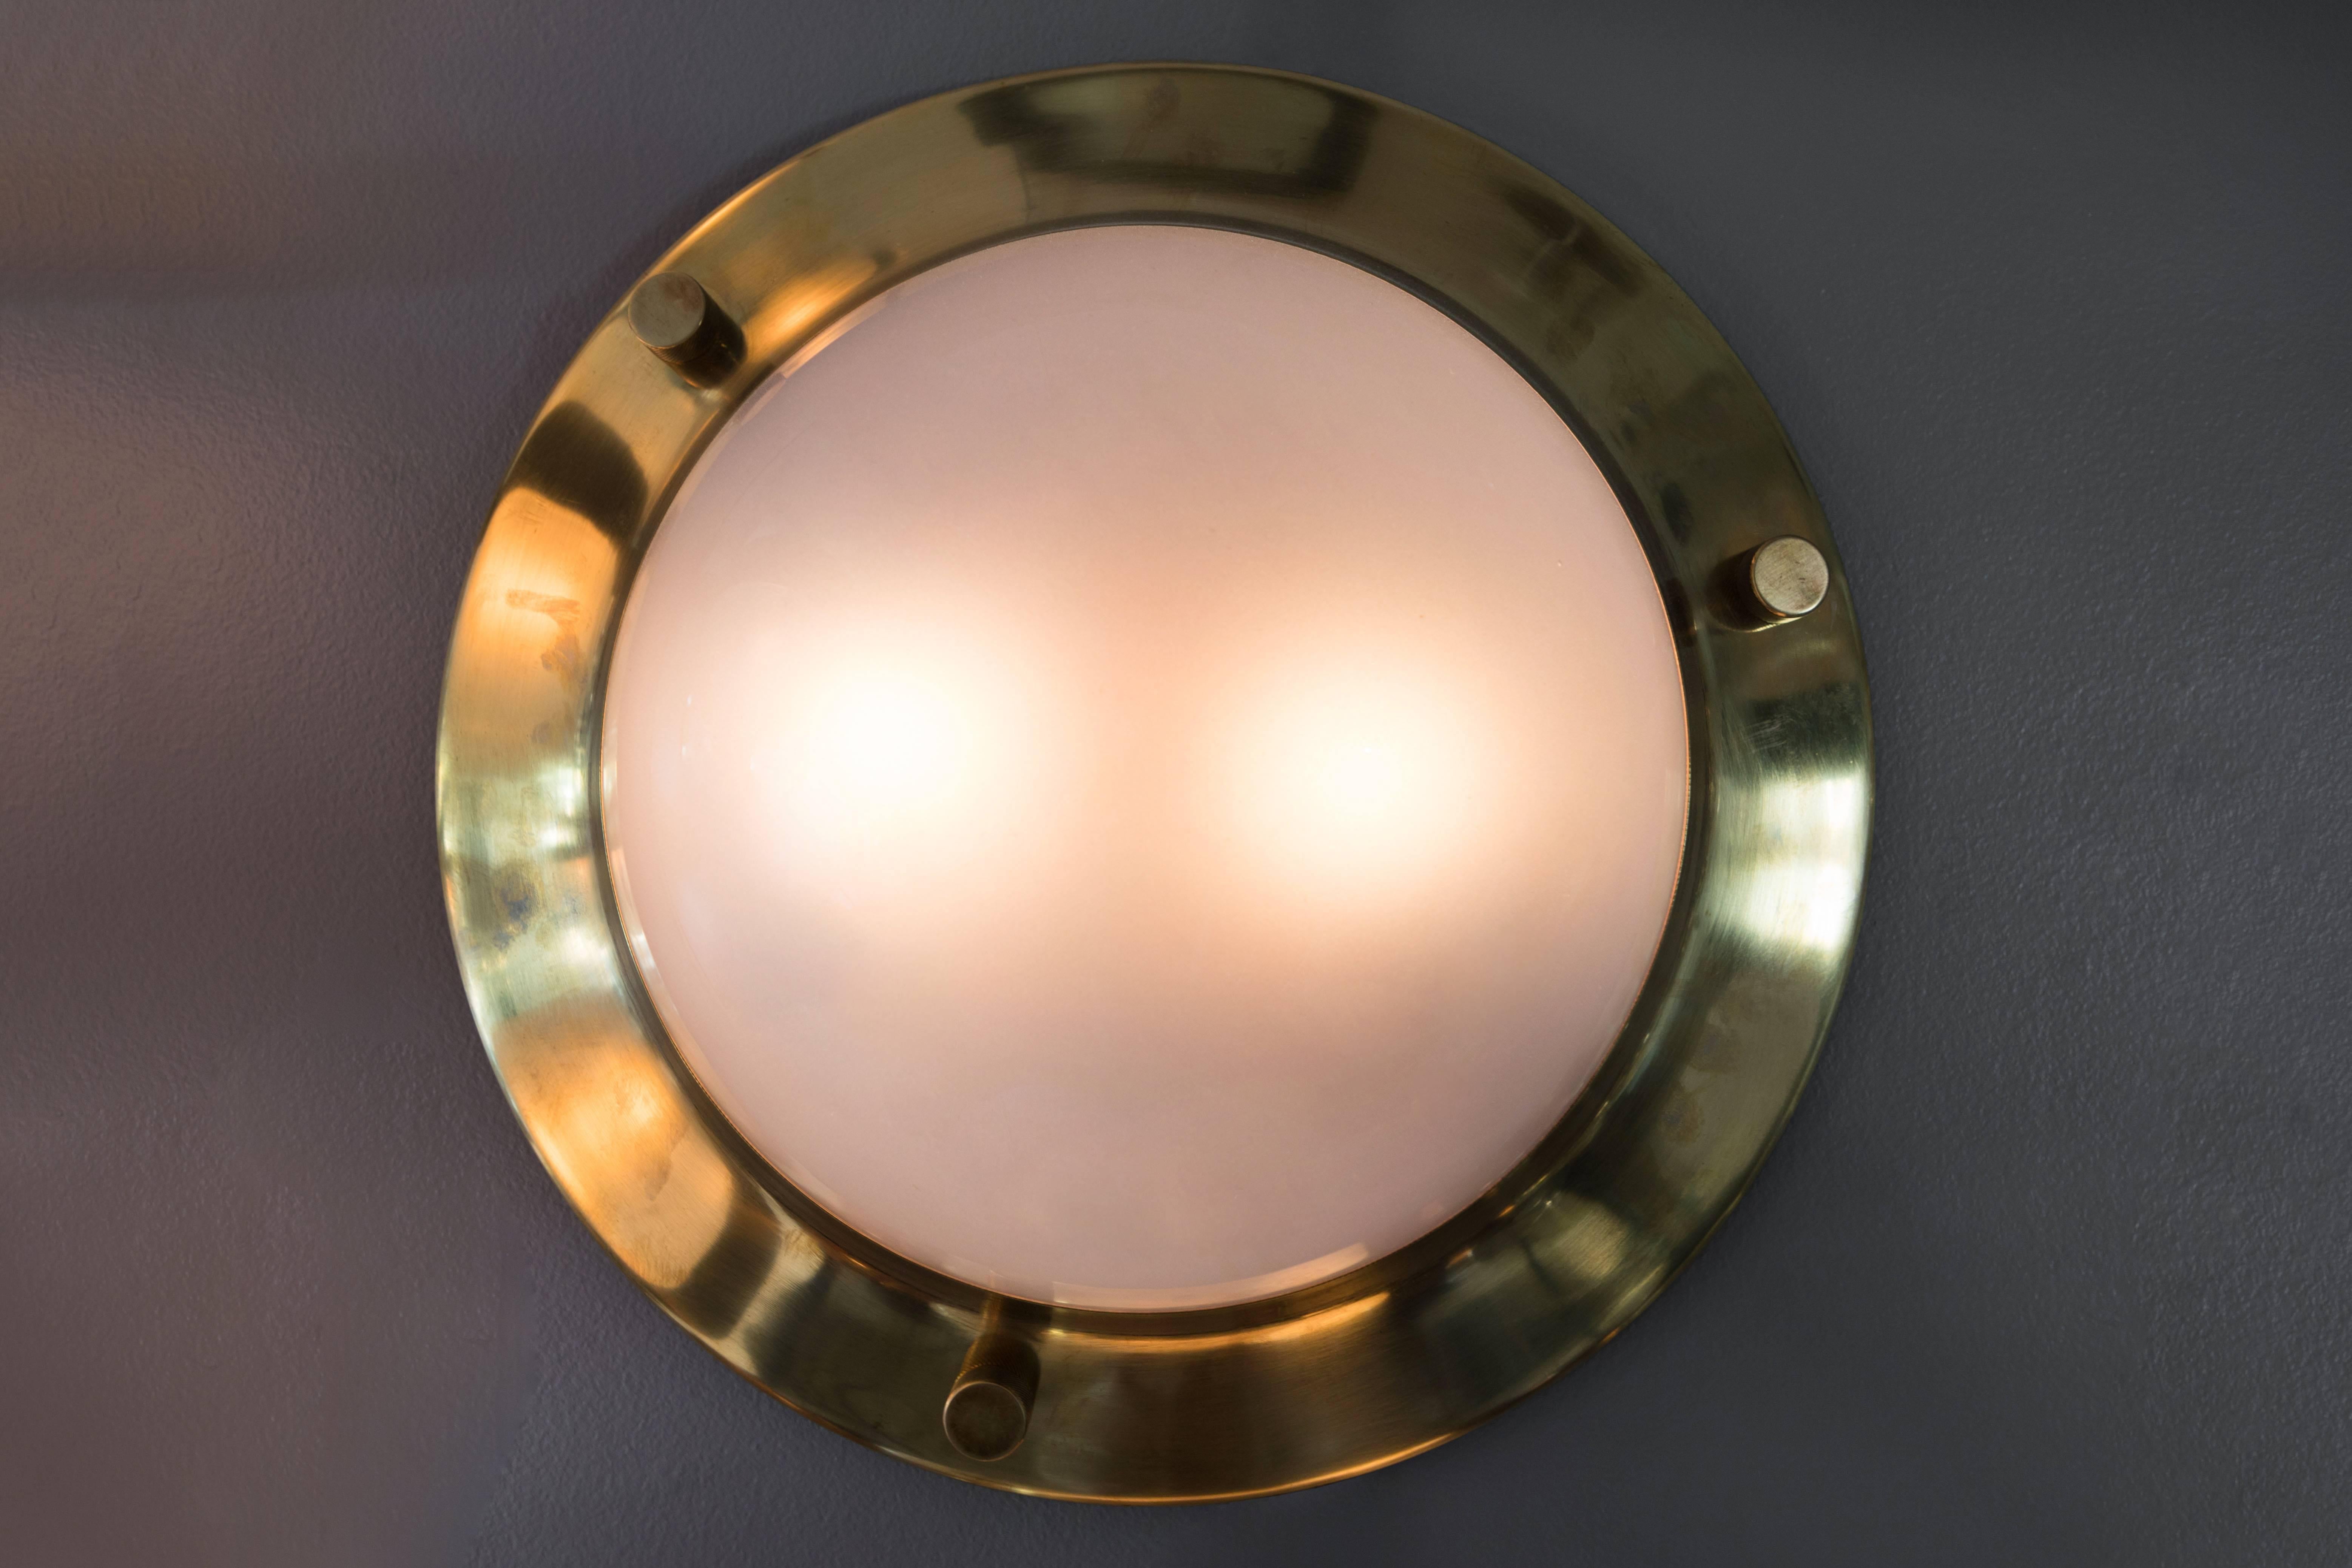 1960s Luigi Caccia Dominioni large 'Tommy' wall or ceiling lights for Azucena. An highly refined and elegant design executed in polished brass and opaline glass, Italy, circa 1965. Azucena was one of the most innovative lighting design companies in